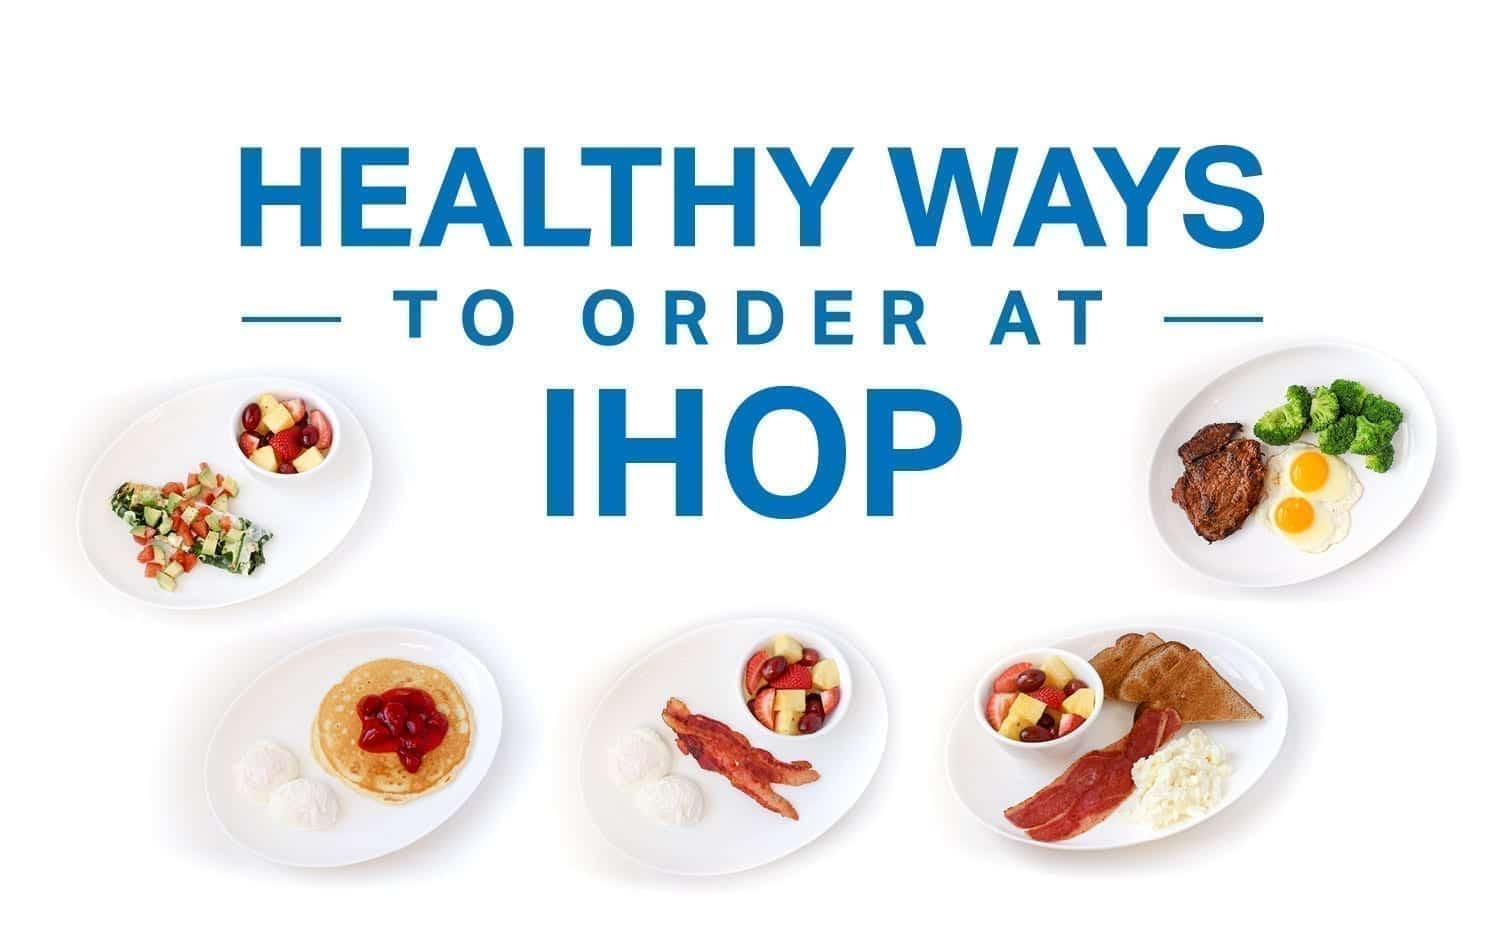 The 10 Best & Worst Orders at IHOP, According to Nutritionists